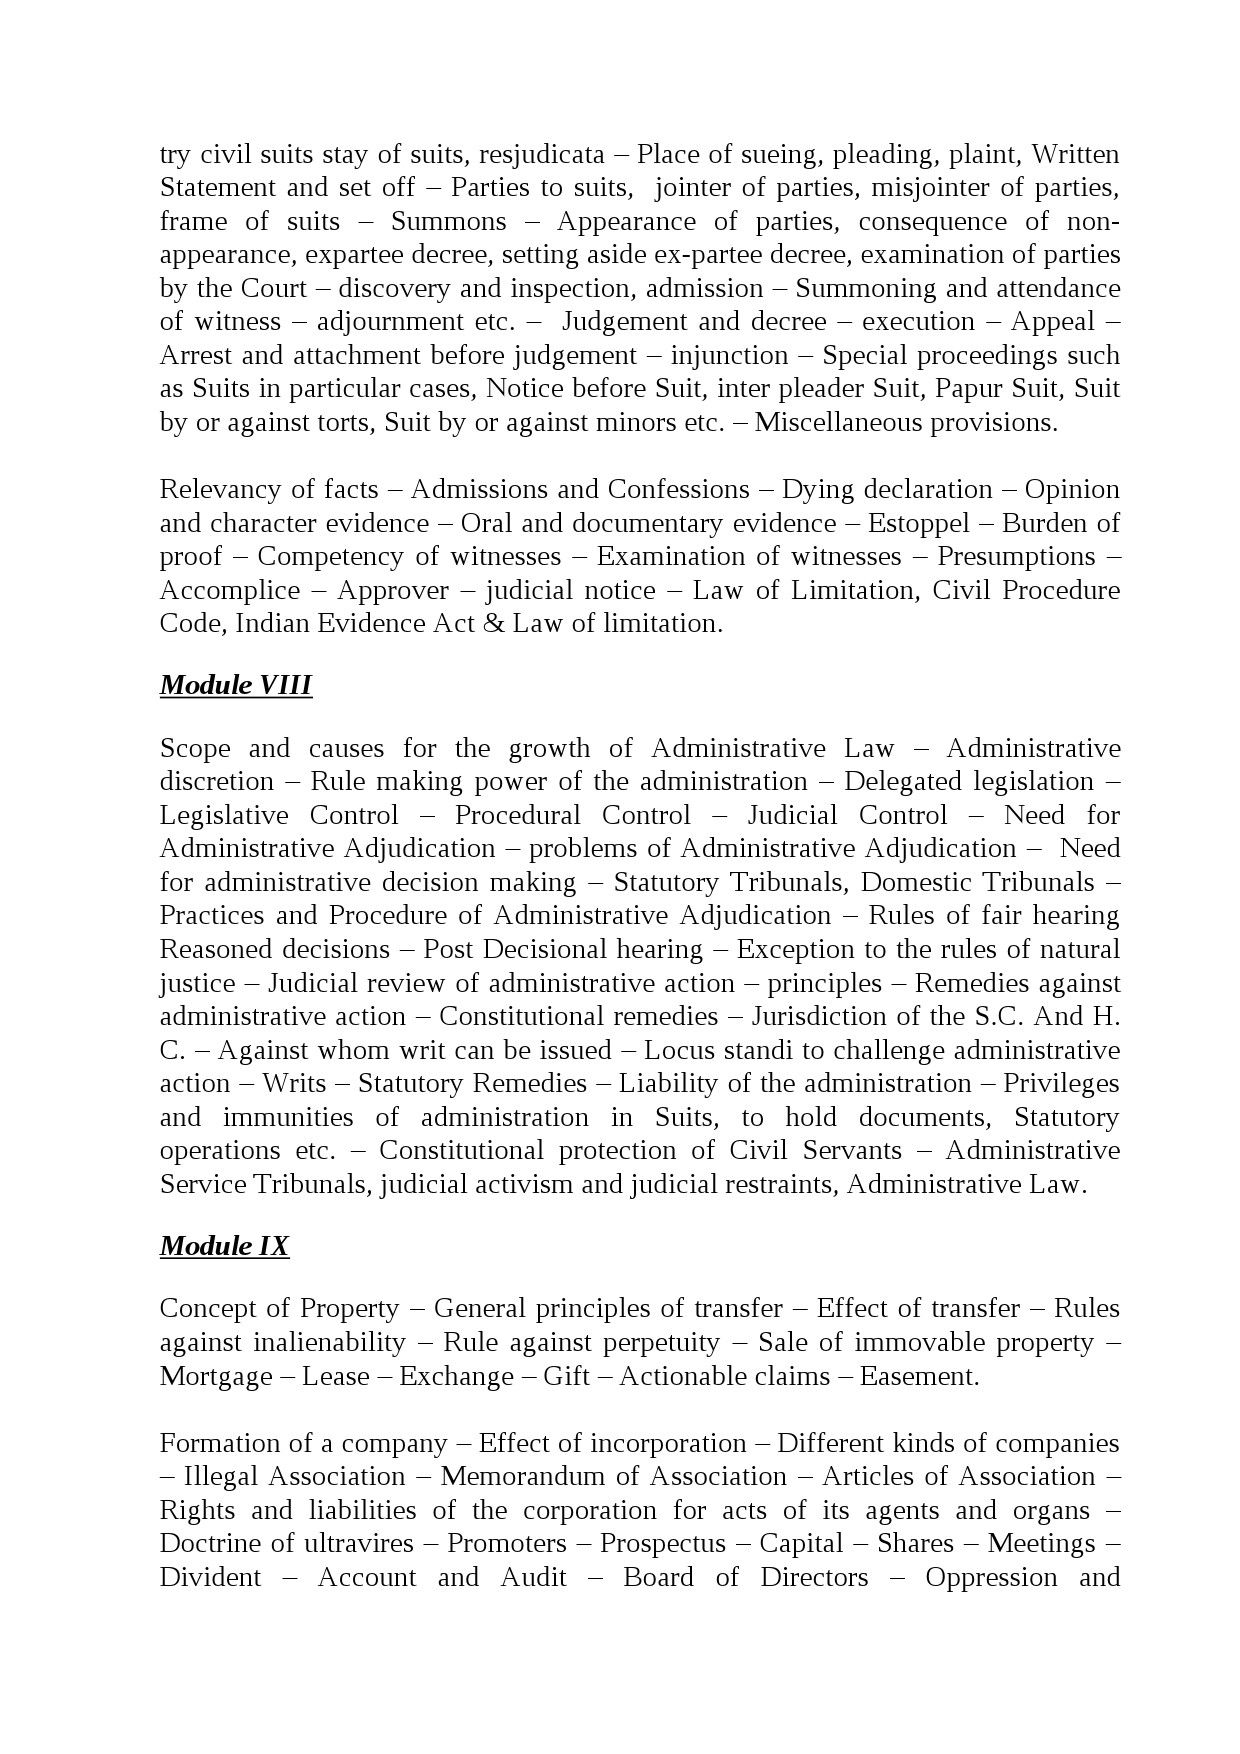 Syllabus for Exams with LLB as Qualification - Notification Image 4